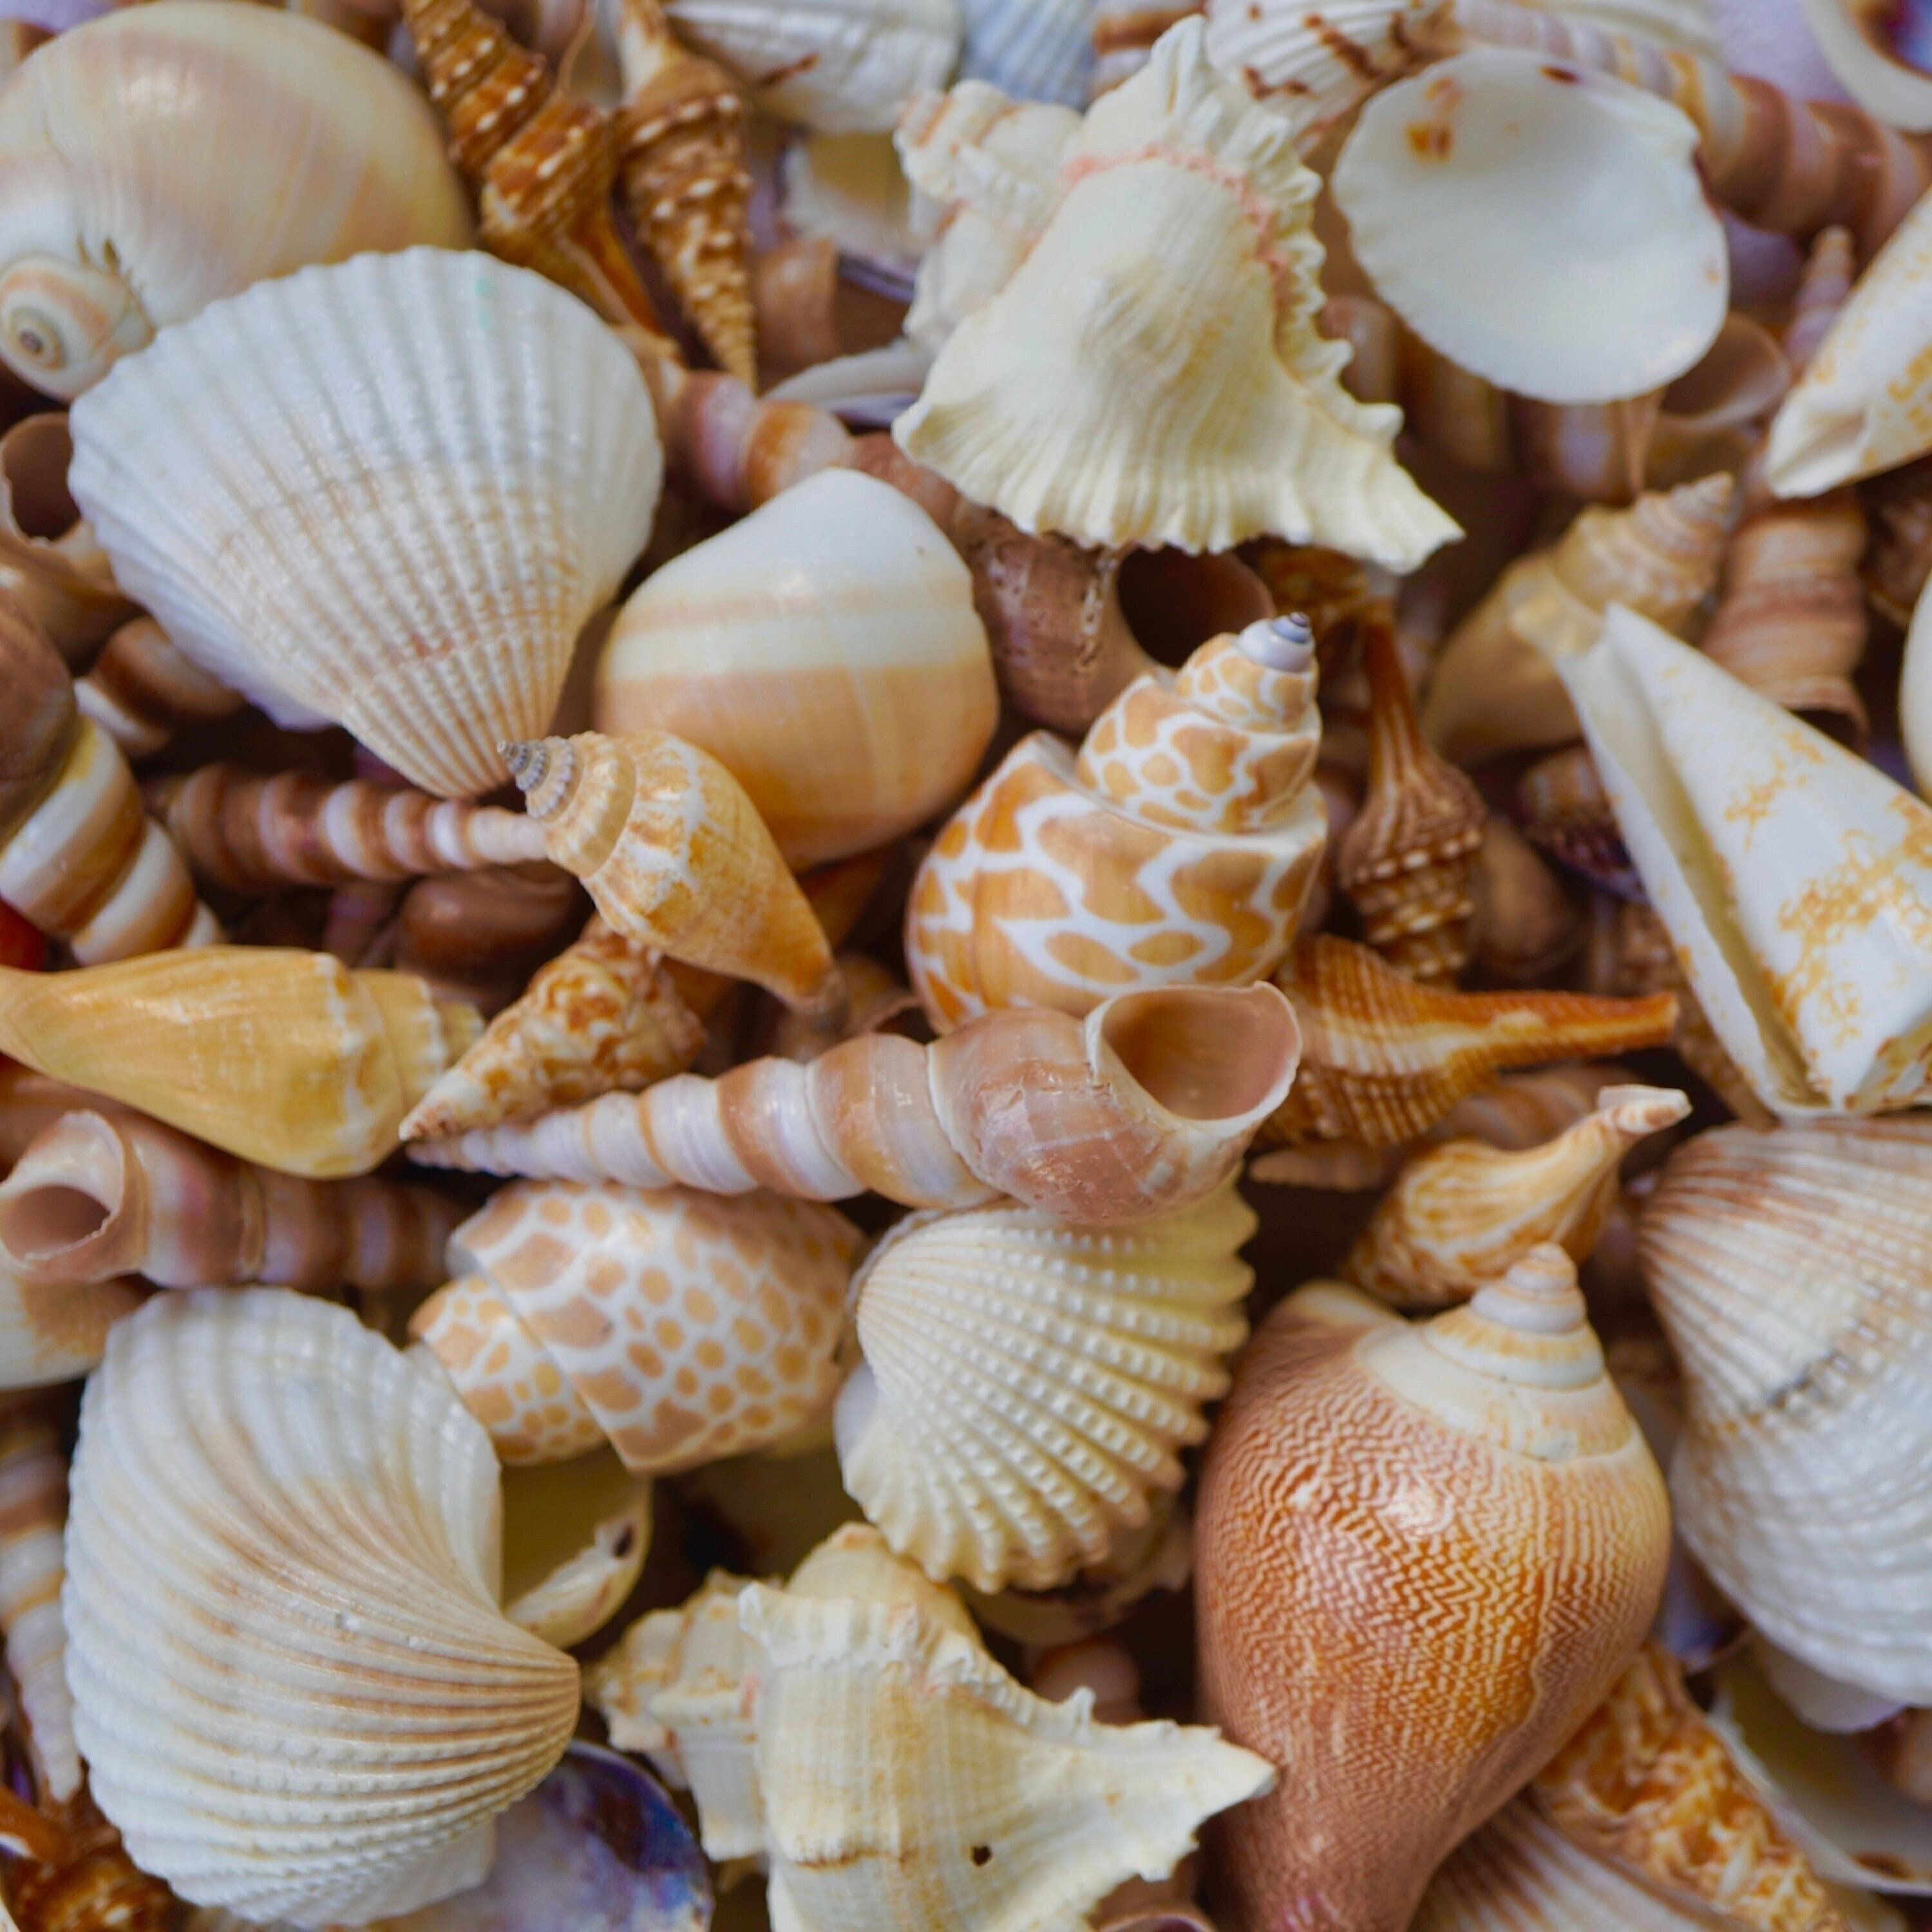 Natural Seashell Embellishments | Mini Sea Shells for Nautical Decoration |  Filling Materials for Resin Crafts (40-80pcs / 4mm to 25mm)